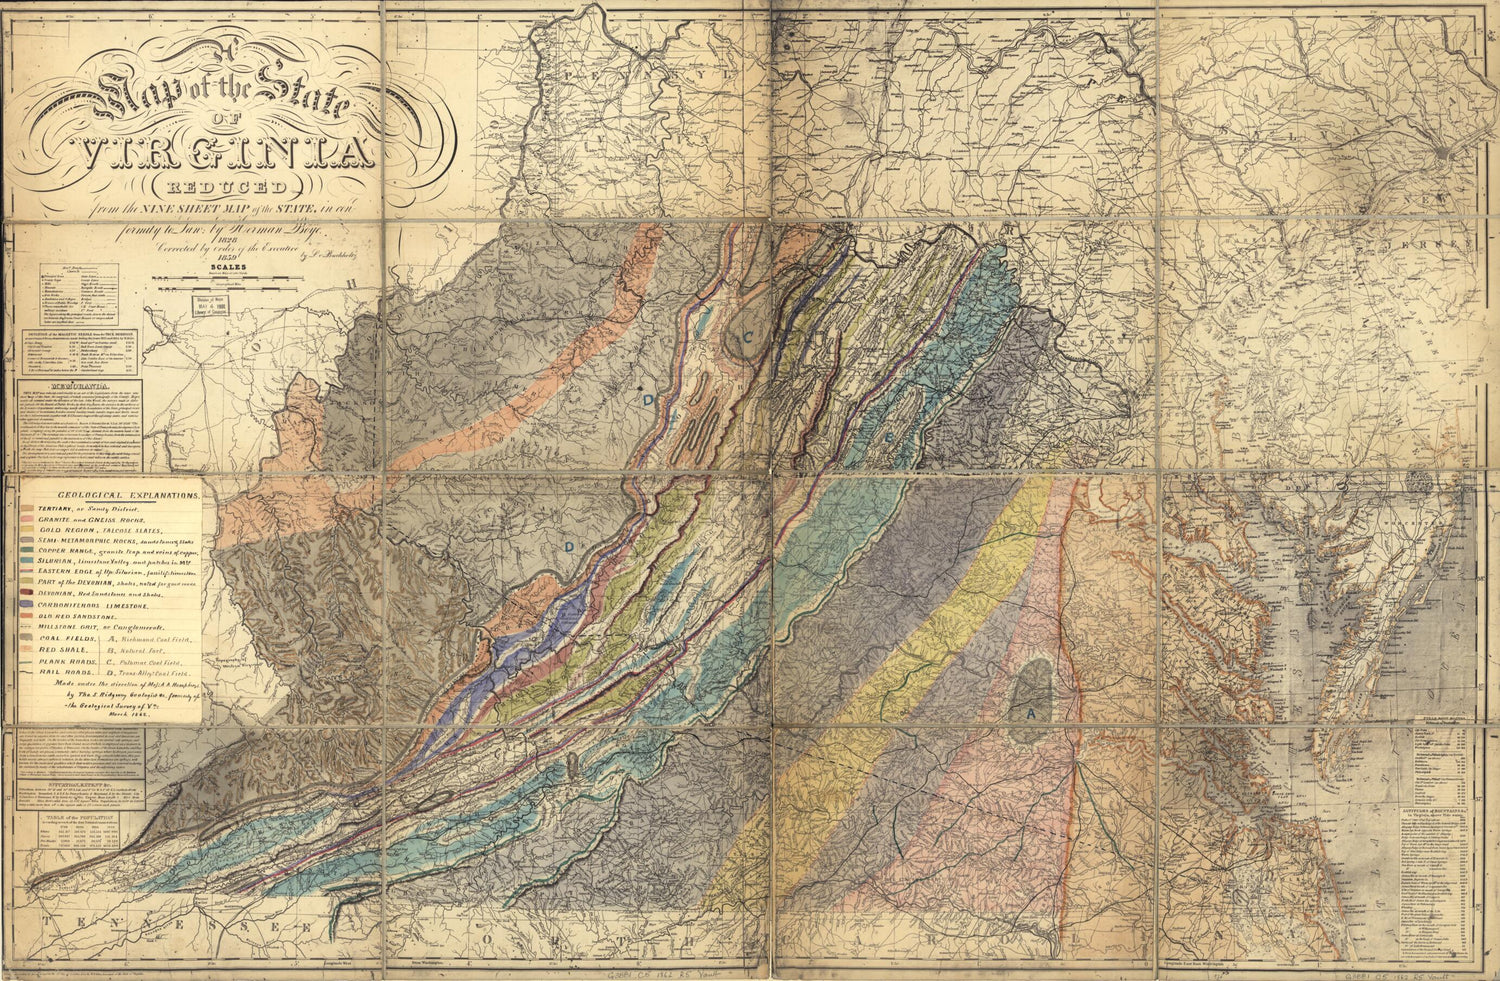 This old map of Geological Map of the State of Virginia from 1862 was created by Herman Böÿe, A. A. (Andrew Atkinson) Humphreys, Thomas S. Ridgeway in 1862